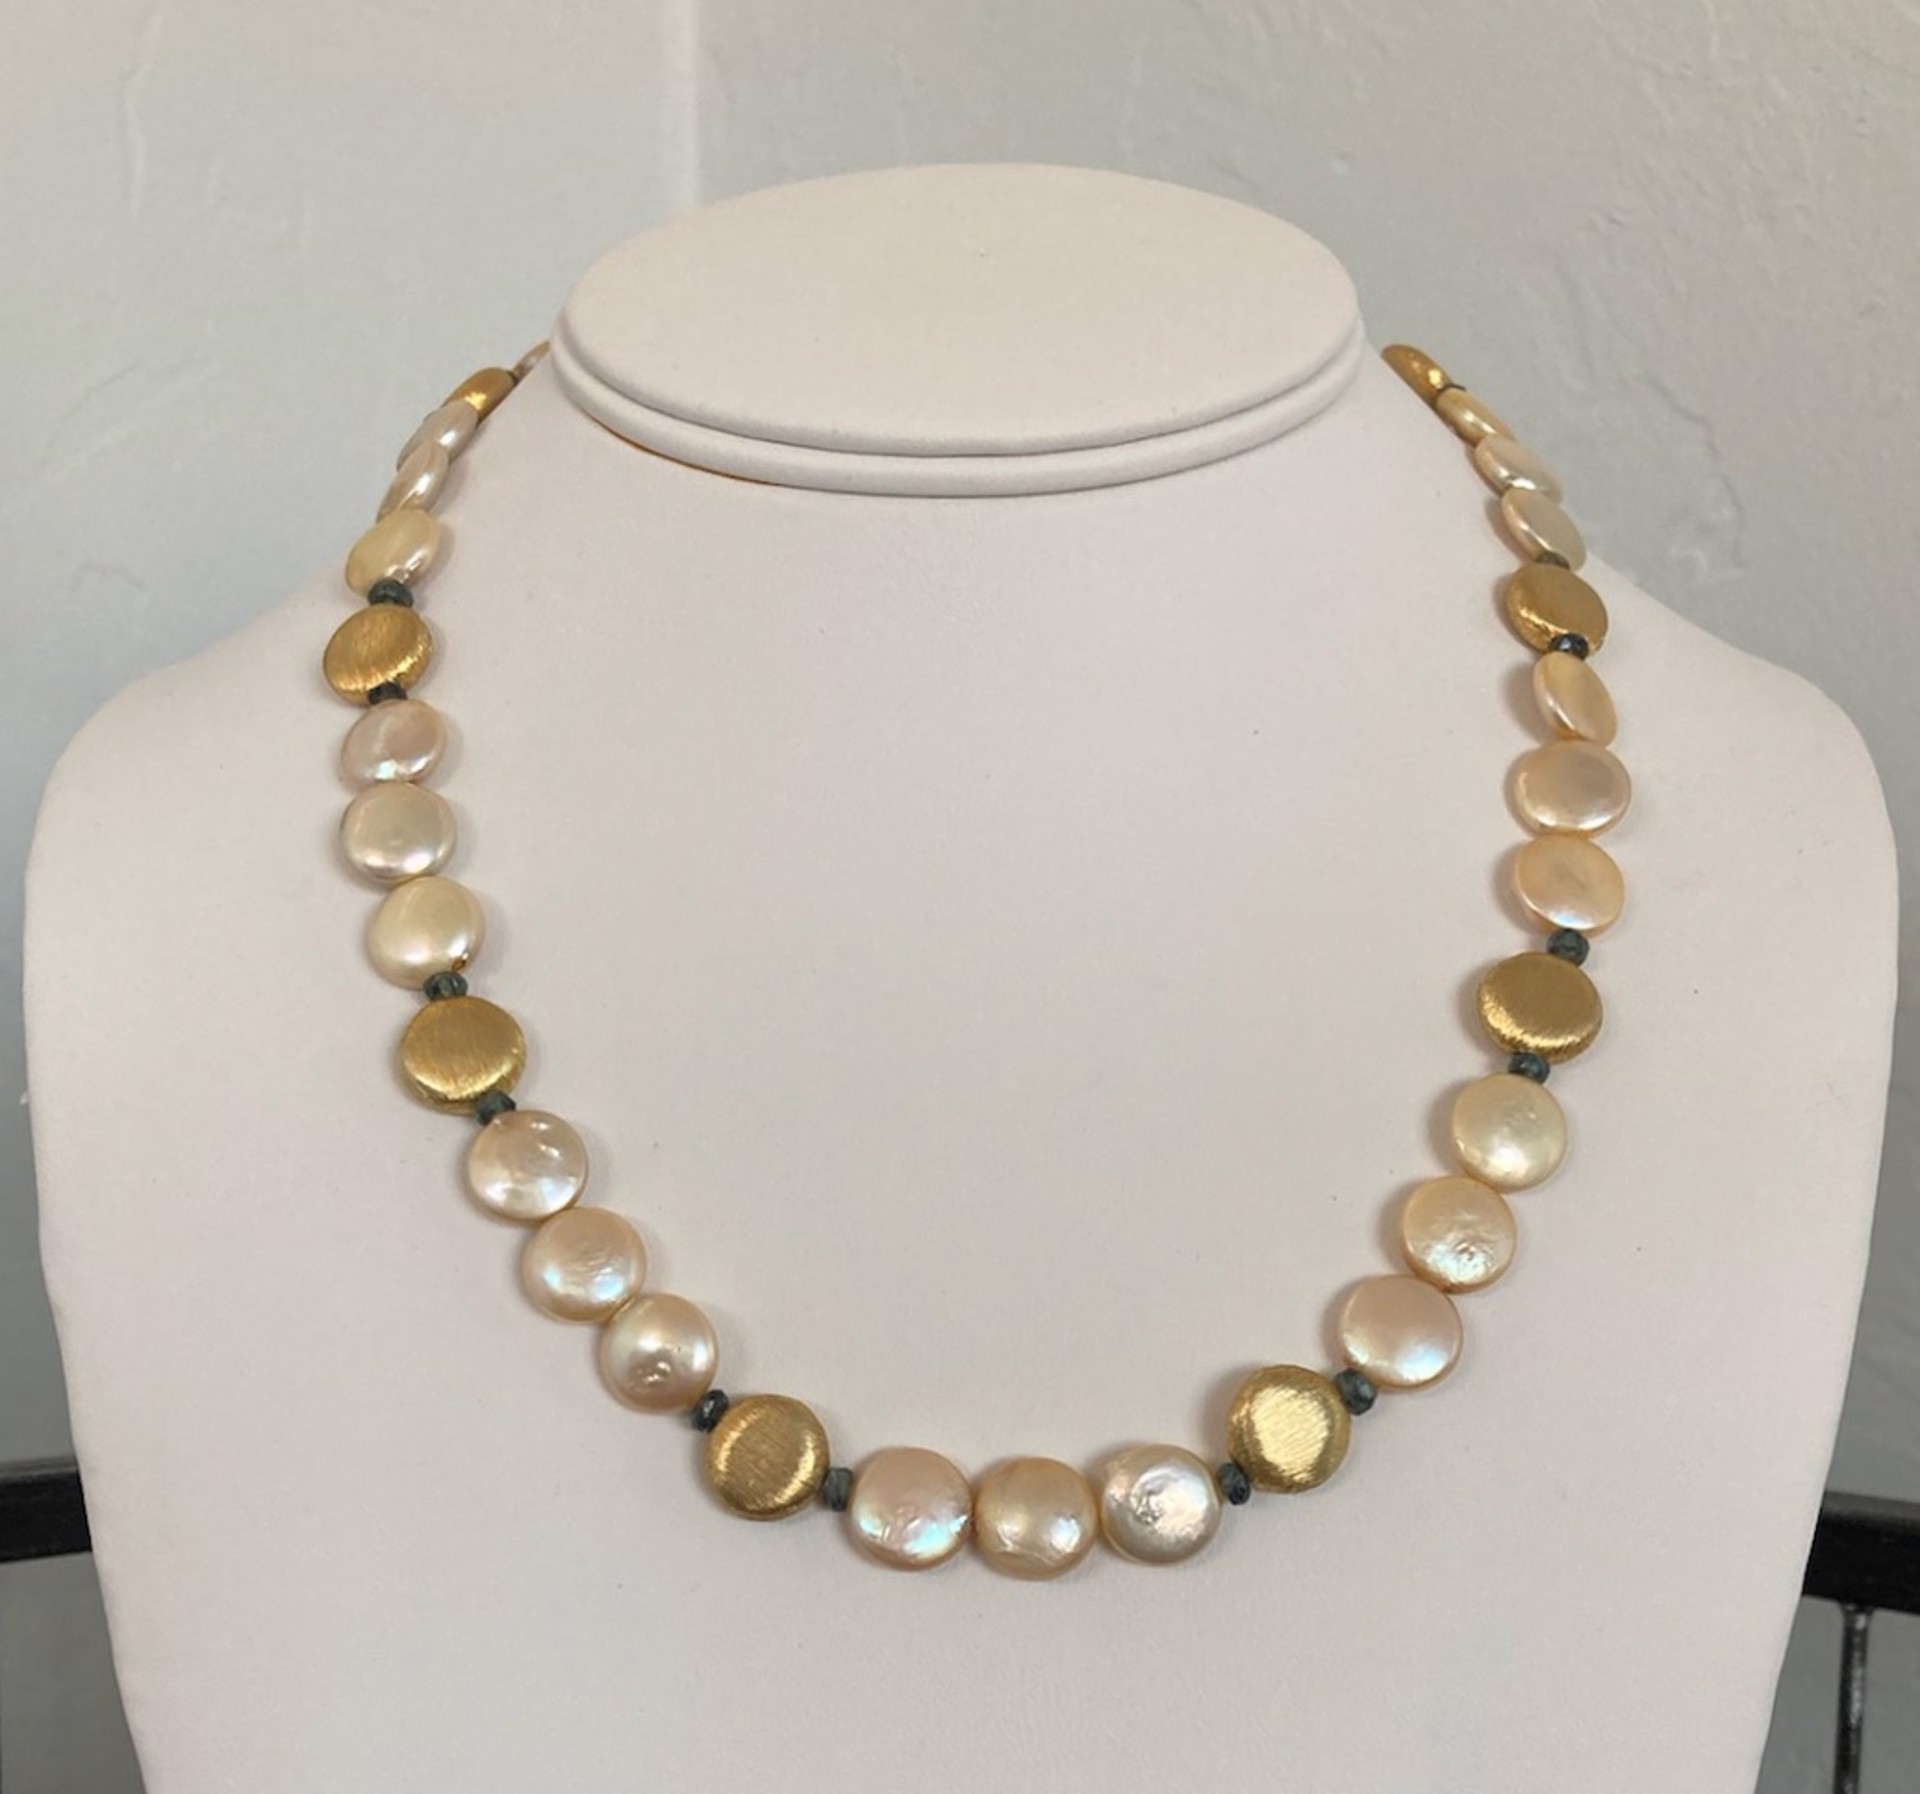 Necklace - Coin Pearls with Green Sapphires and Vermeil by Bonnie Jaus